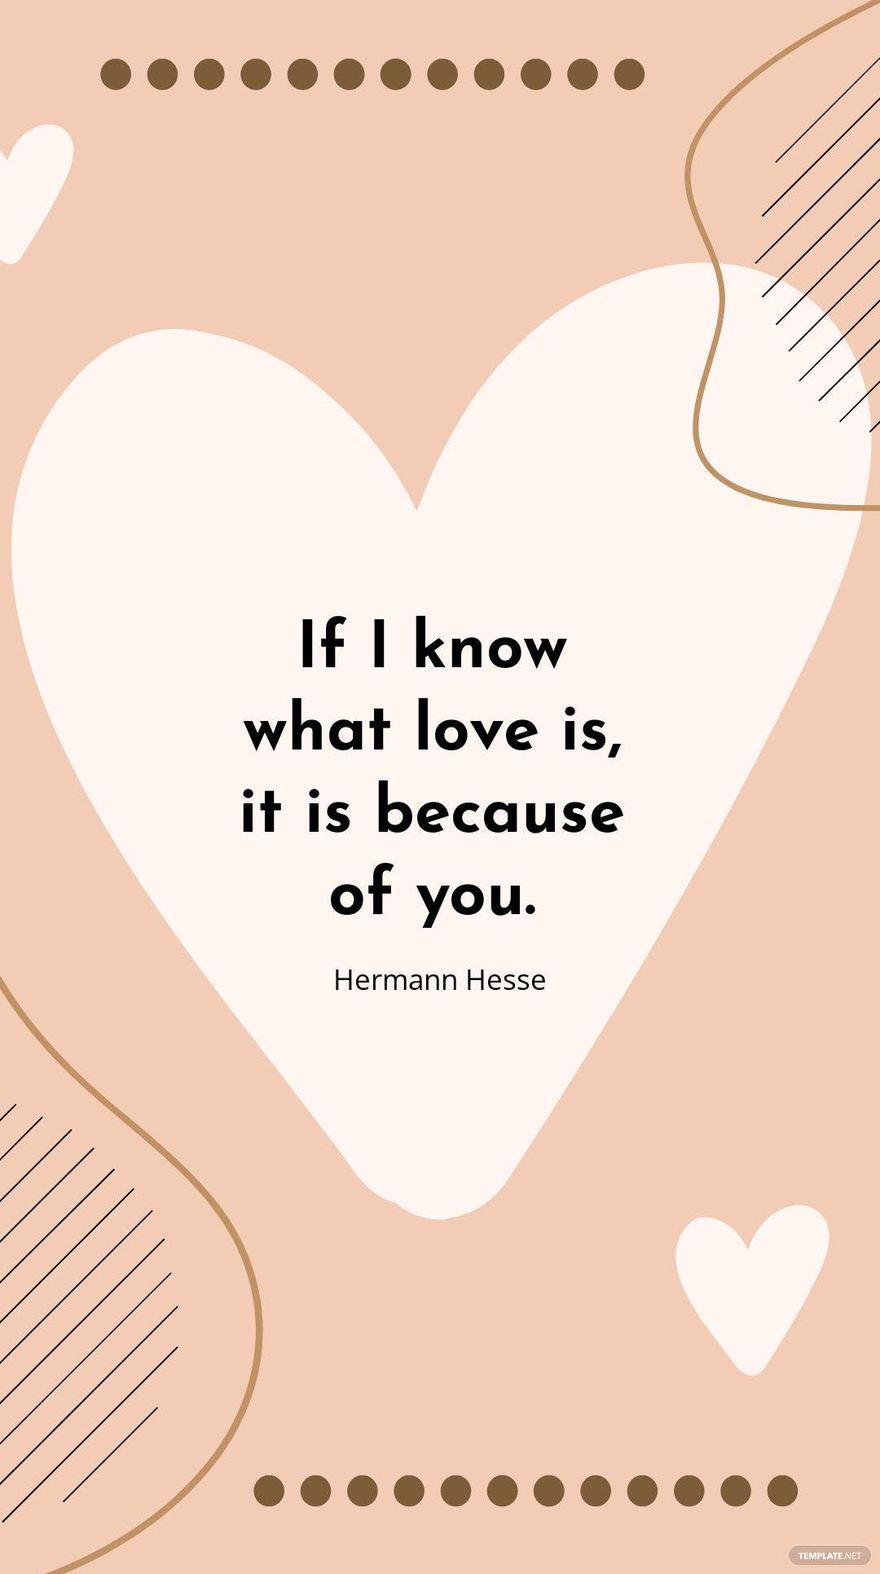 Hermann Hesse - "If I know what love is, it is because of you.”